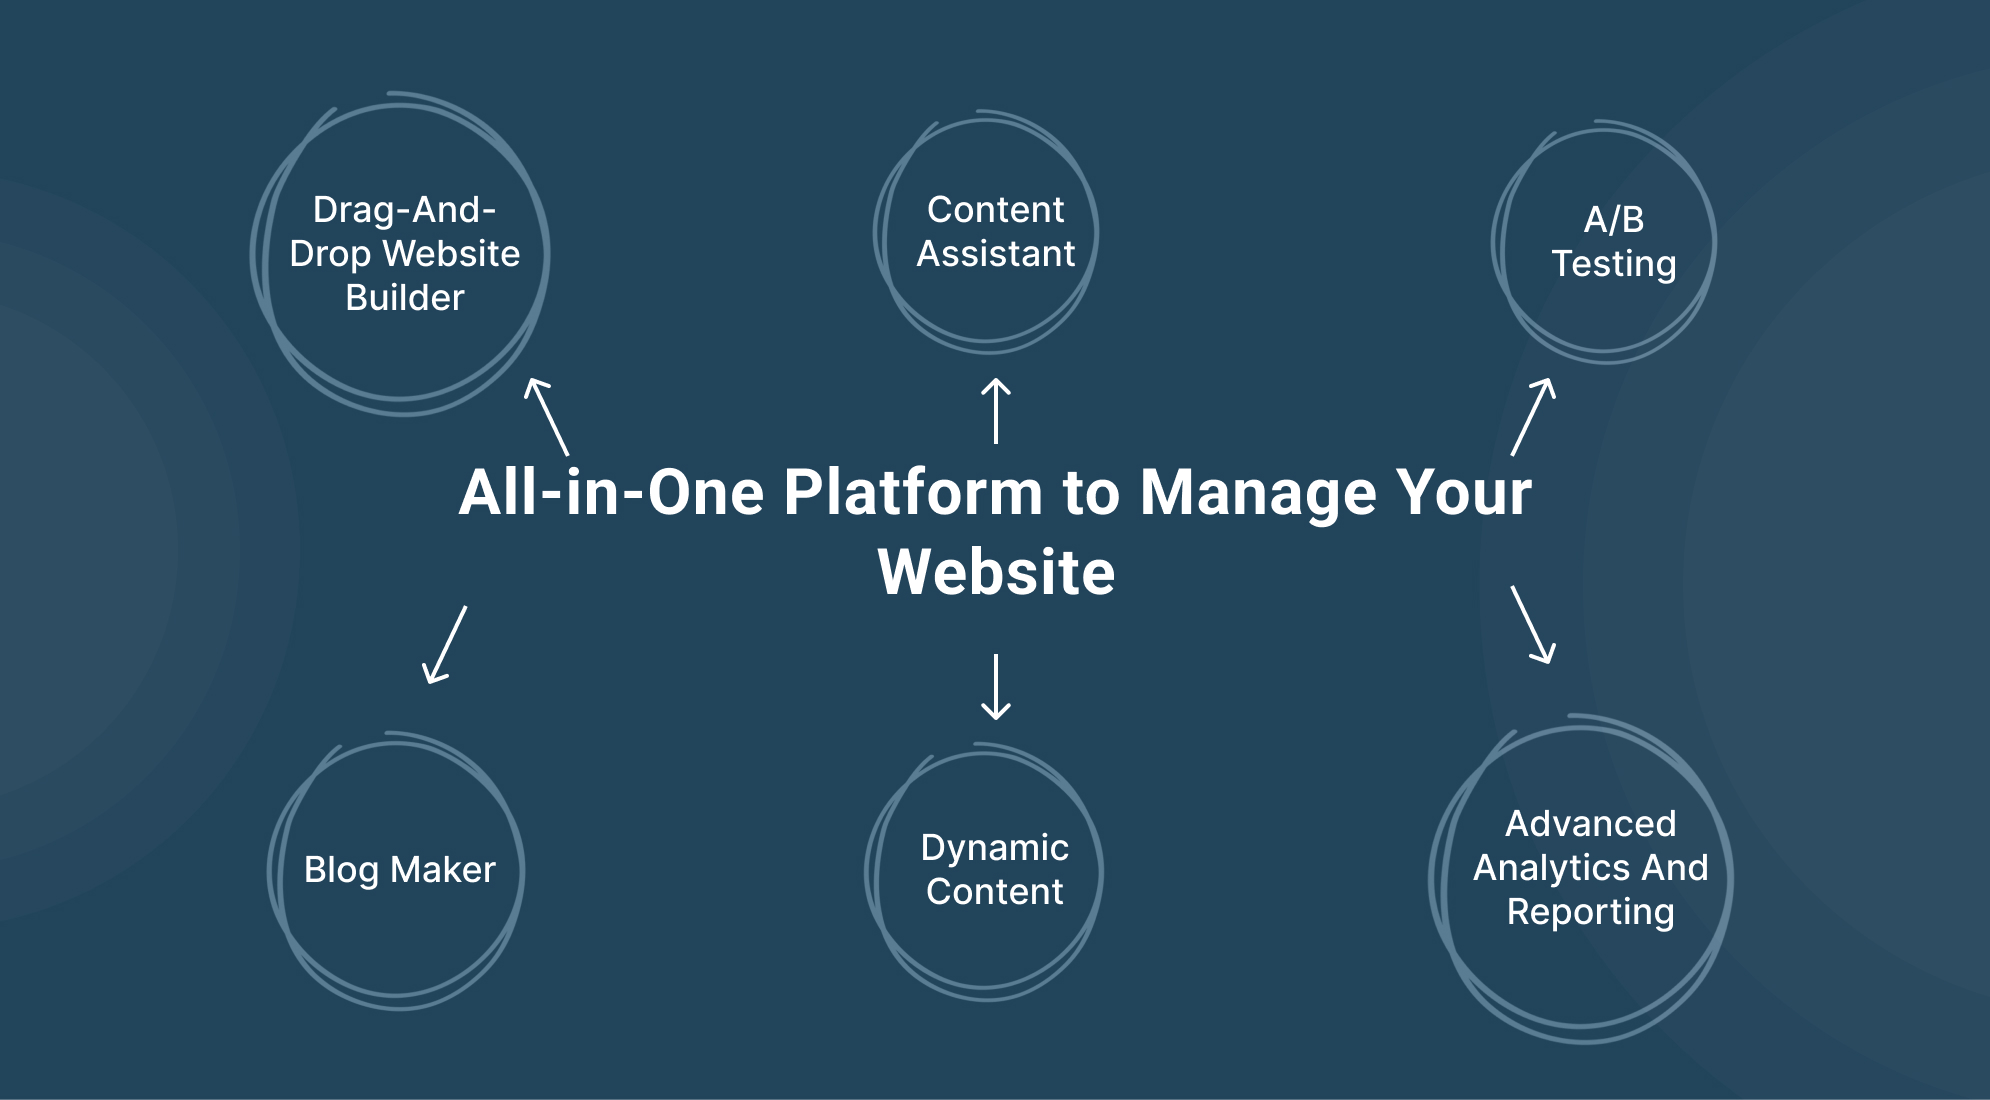 All-in-One Platform to Manage Your Website